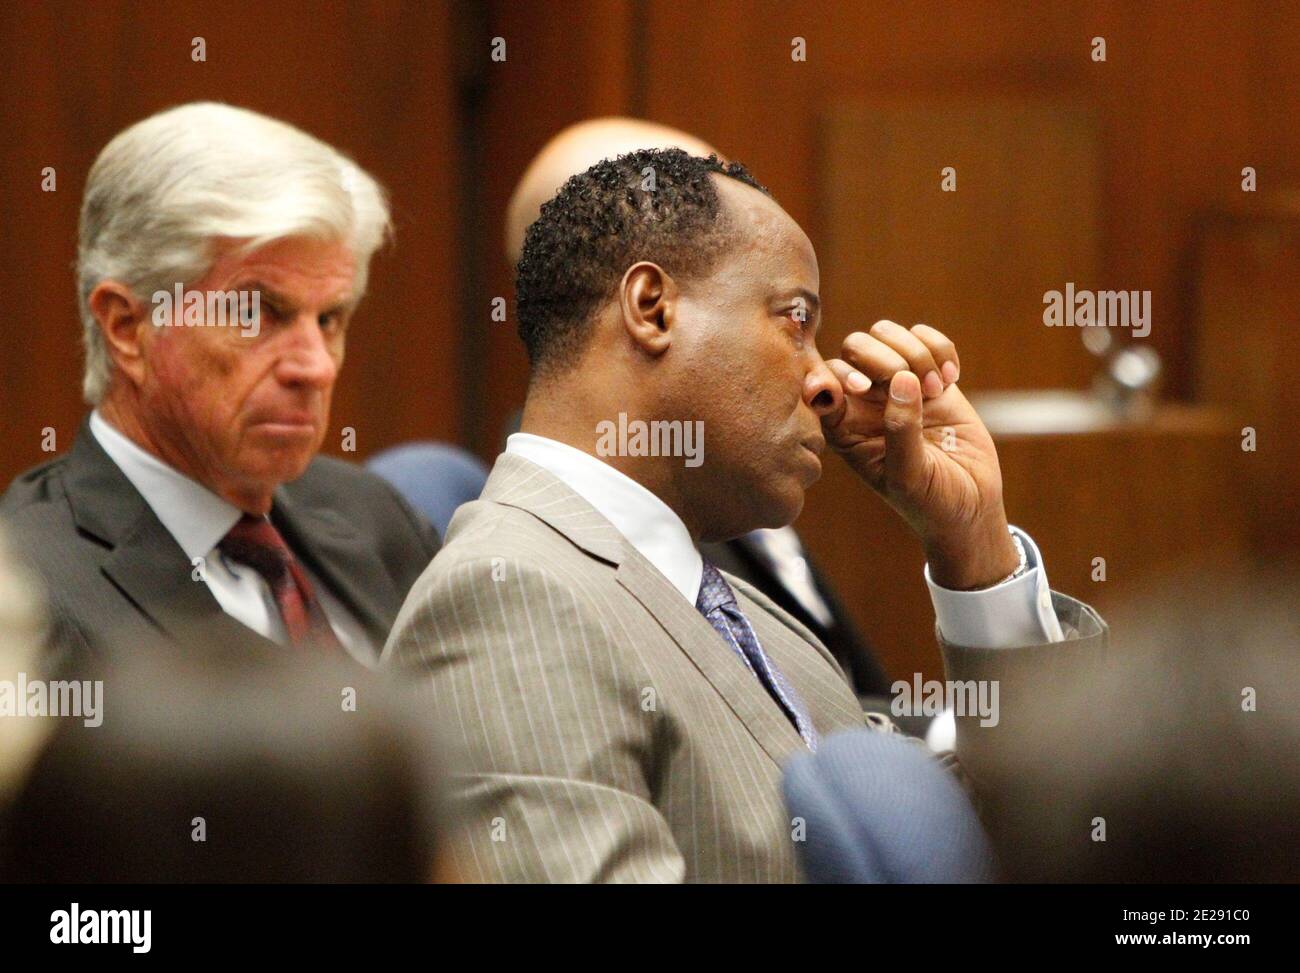 Conrad Murray wipes a tear during the defense opening arguments in his involuntary manslaughter trial at Superior Court in downtown, Los Angeles, CA on September 27, 2011. Photo by Al Seib/Pool/ABACAPRESS.COM Stock Photo